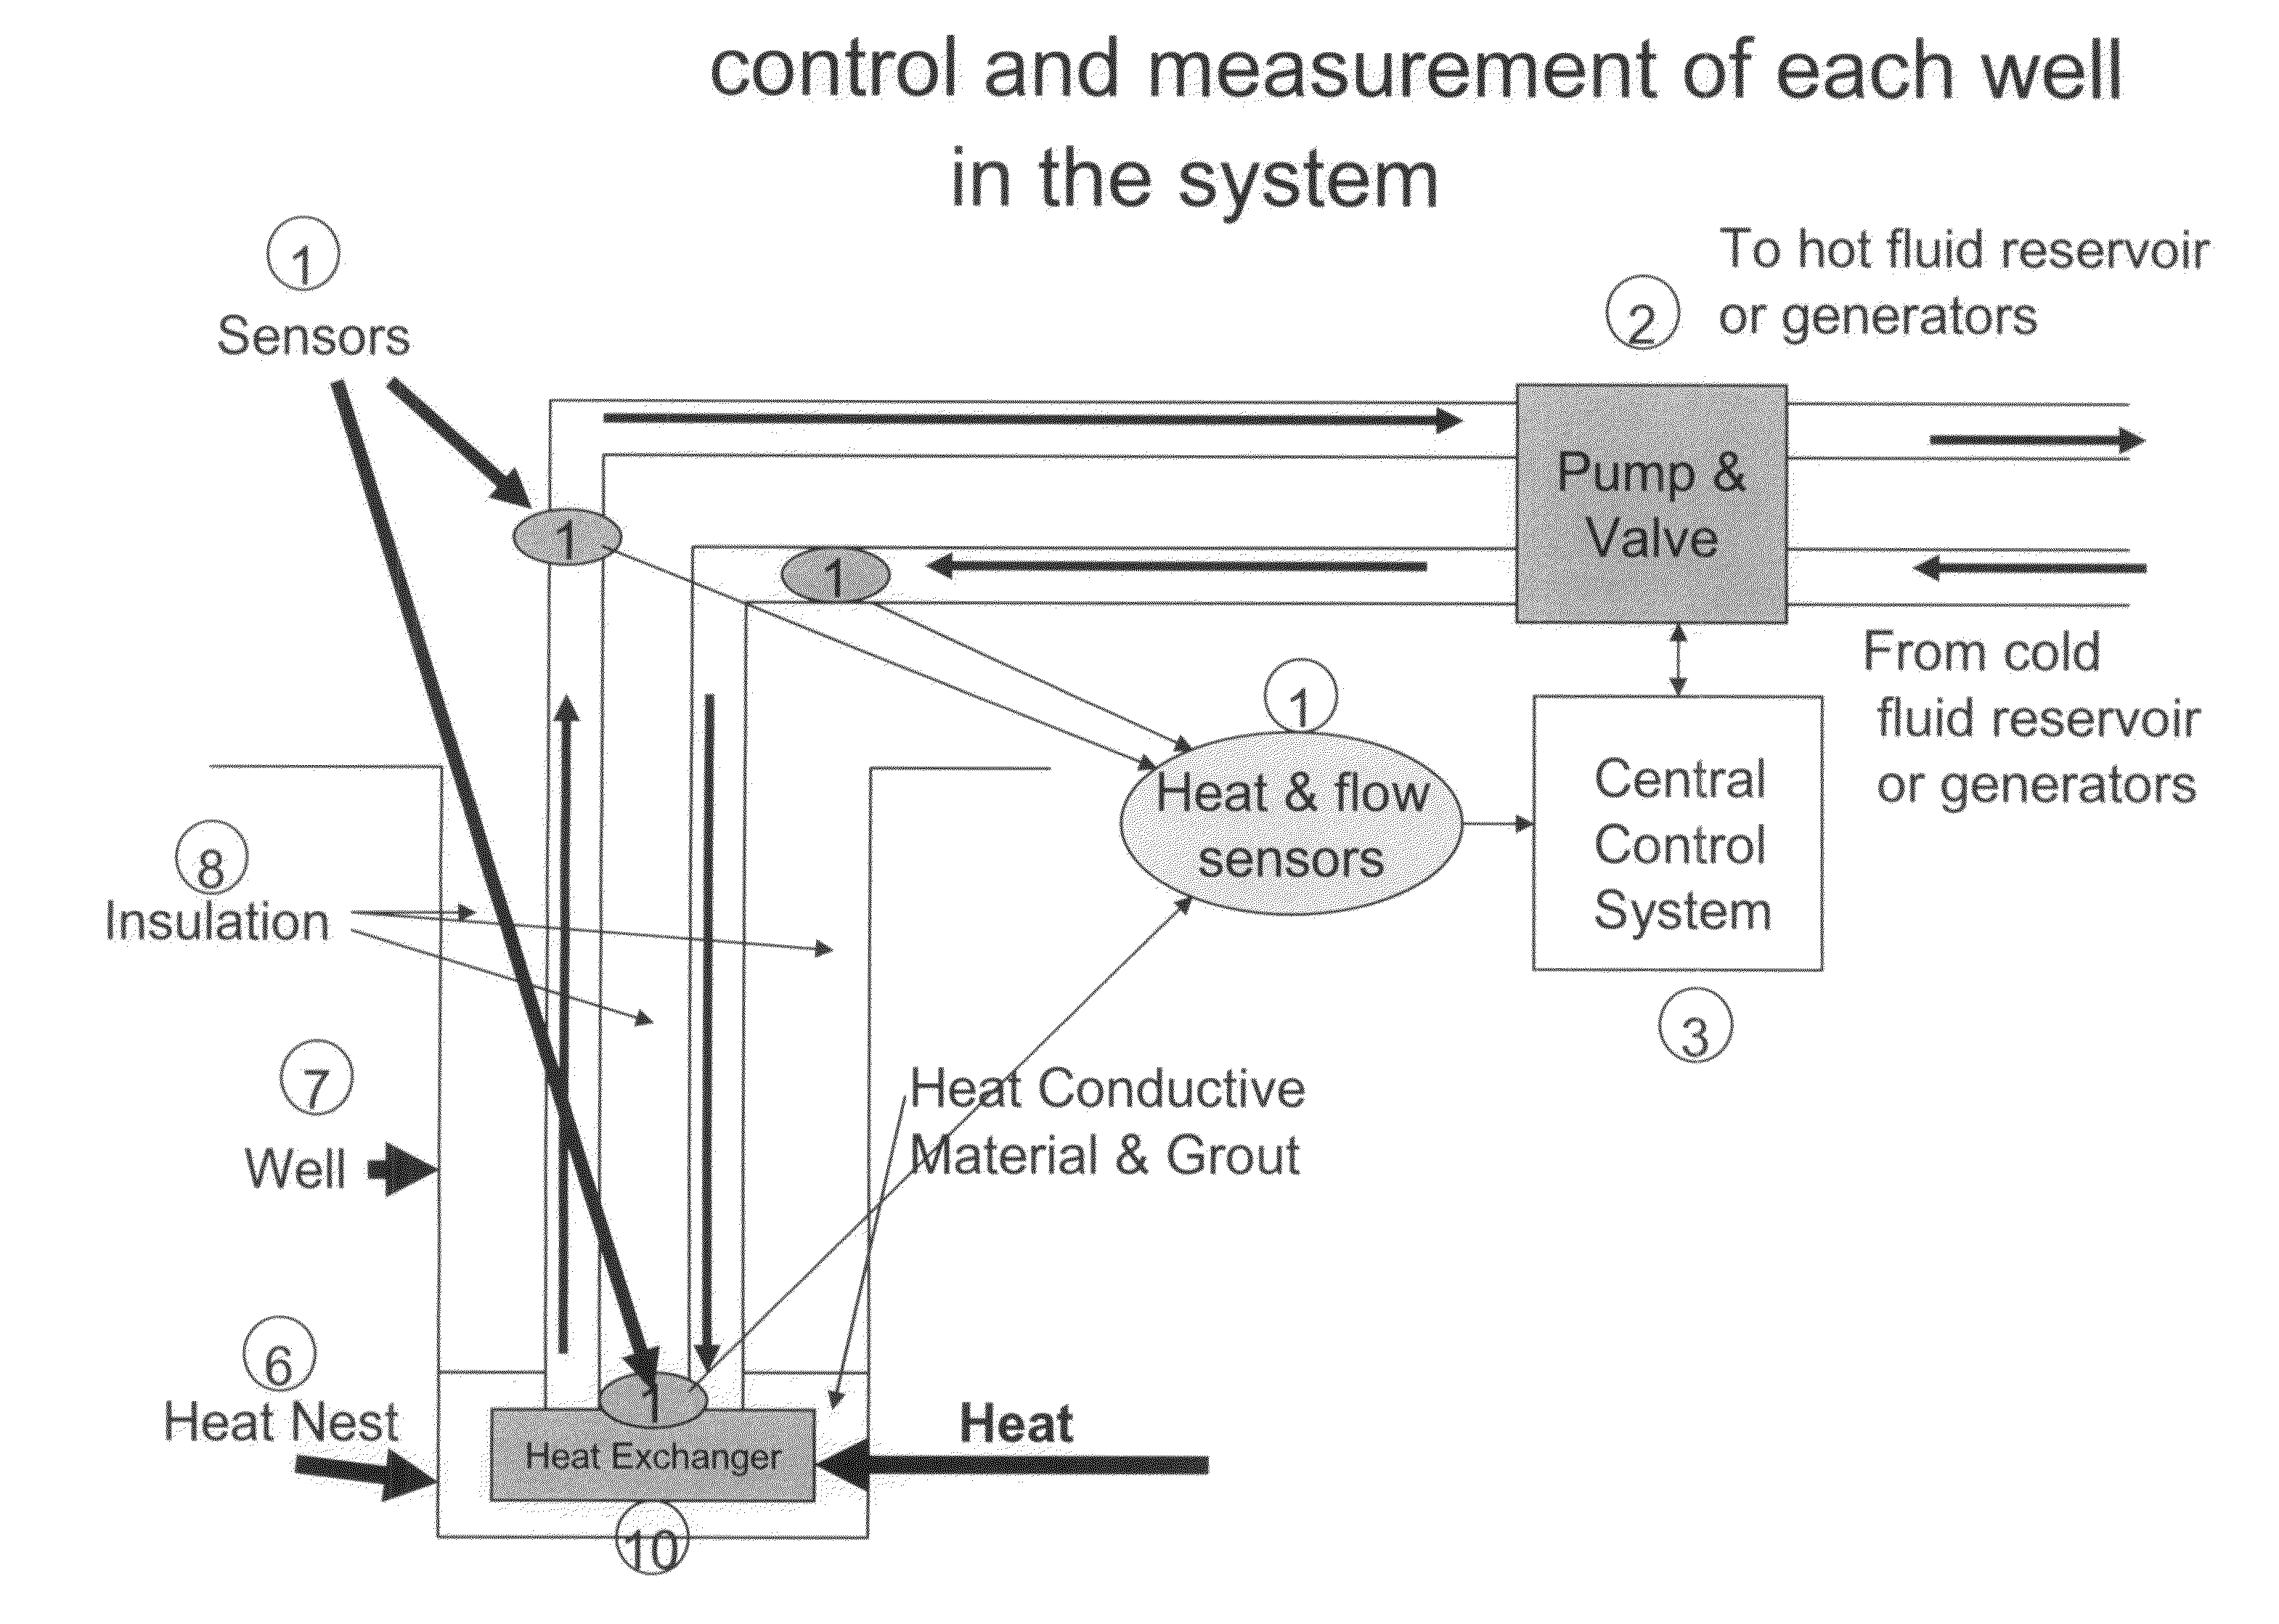 Control system to manage and optimize a geothermal electric generation system from one or more wells that individually produce heat